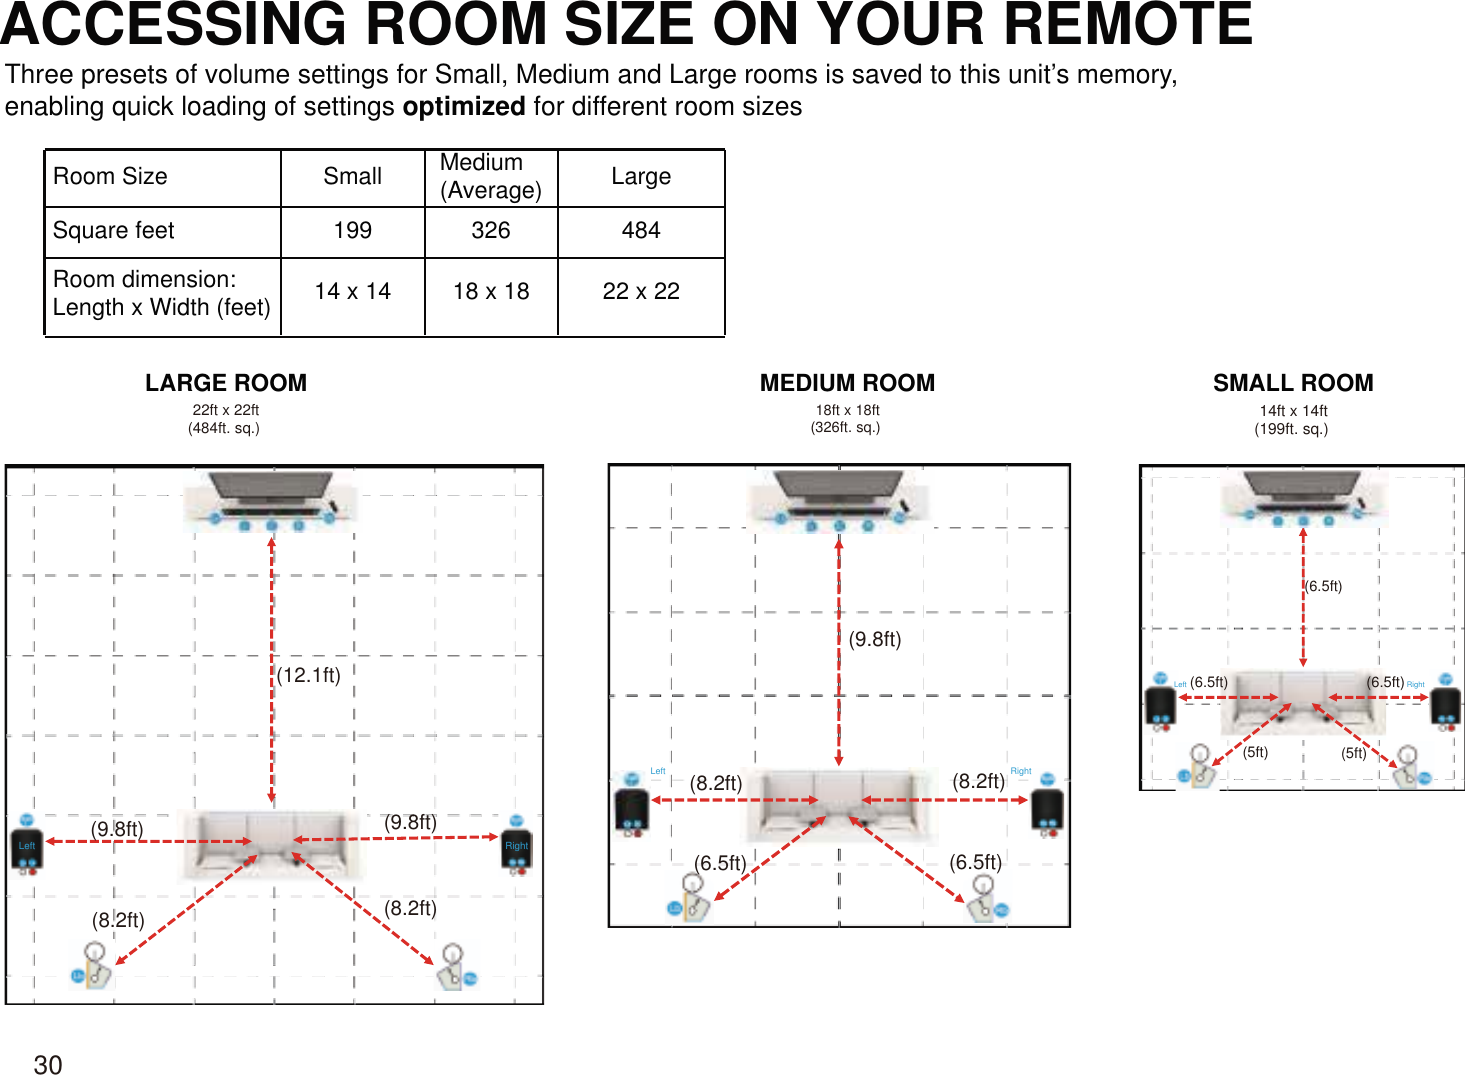 ACCESSING ROOM SIZE ON YOUR REMOTE Three presets of volume settings for Small, Medium and Large rooms is saved to this unit’s memory, enabling quick loading of settings optimized for different room sizesRoom Size Small Medium(Average) LargeSquare feet 199 326 484Room dimension:Length x Width (feet)  14 x 14 18 x 18 22 x 2222ft x 22ft(484ft. sq.) Left Right18ft x 18ft(326ft. sq.)  14ft x 14ft(199ft. sq.) Left RightMEDIUM ROOMLARGE ROOM SMALL ROOMLeft Right(8.2ft)(8.2ft)(8.2ft)(8.2ft)(9.8ft)(9.8ft)(9.8ft)(12.1ft)(6.5ft) (6.5ft)(6.5ft) (6.5ft)(5ft)(5ft)(6.5ft)30